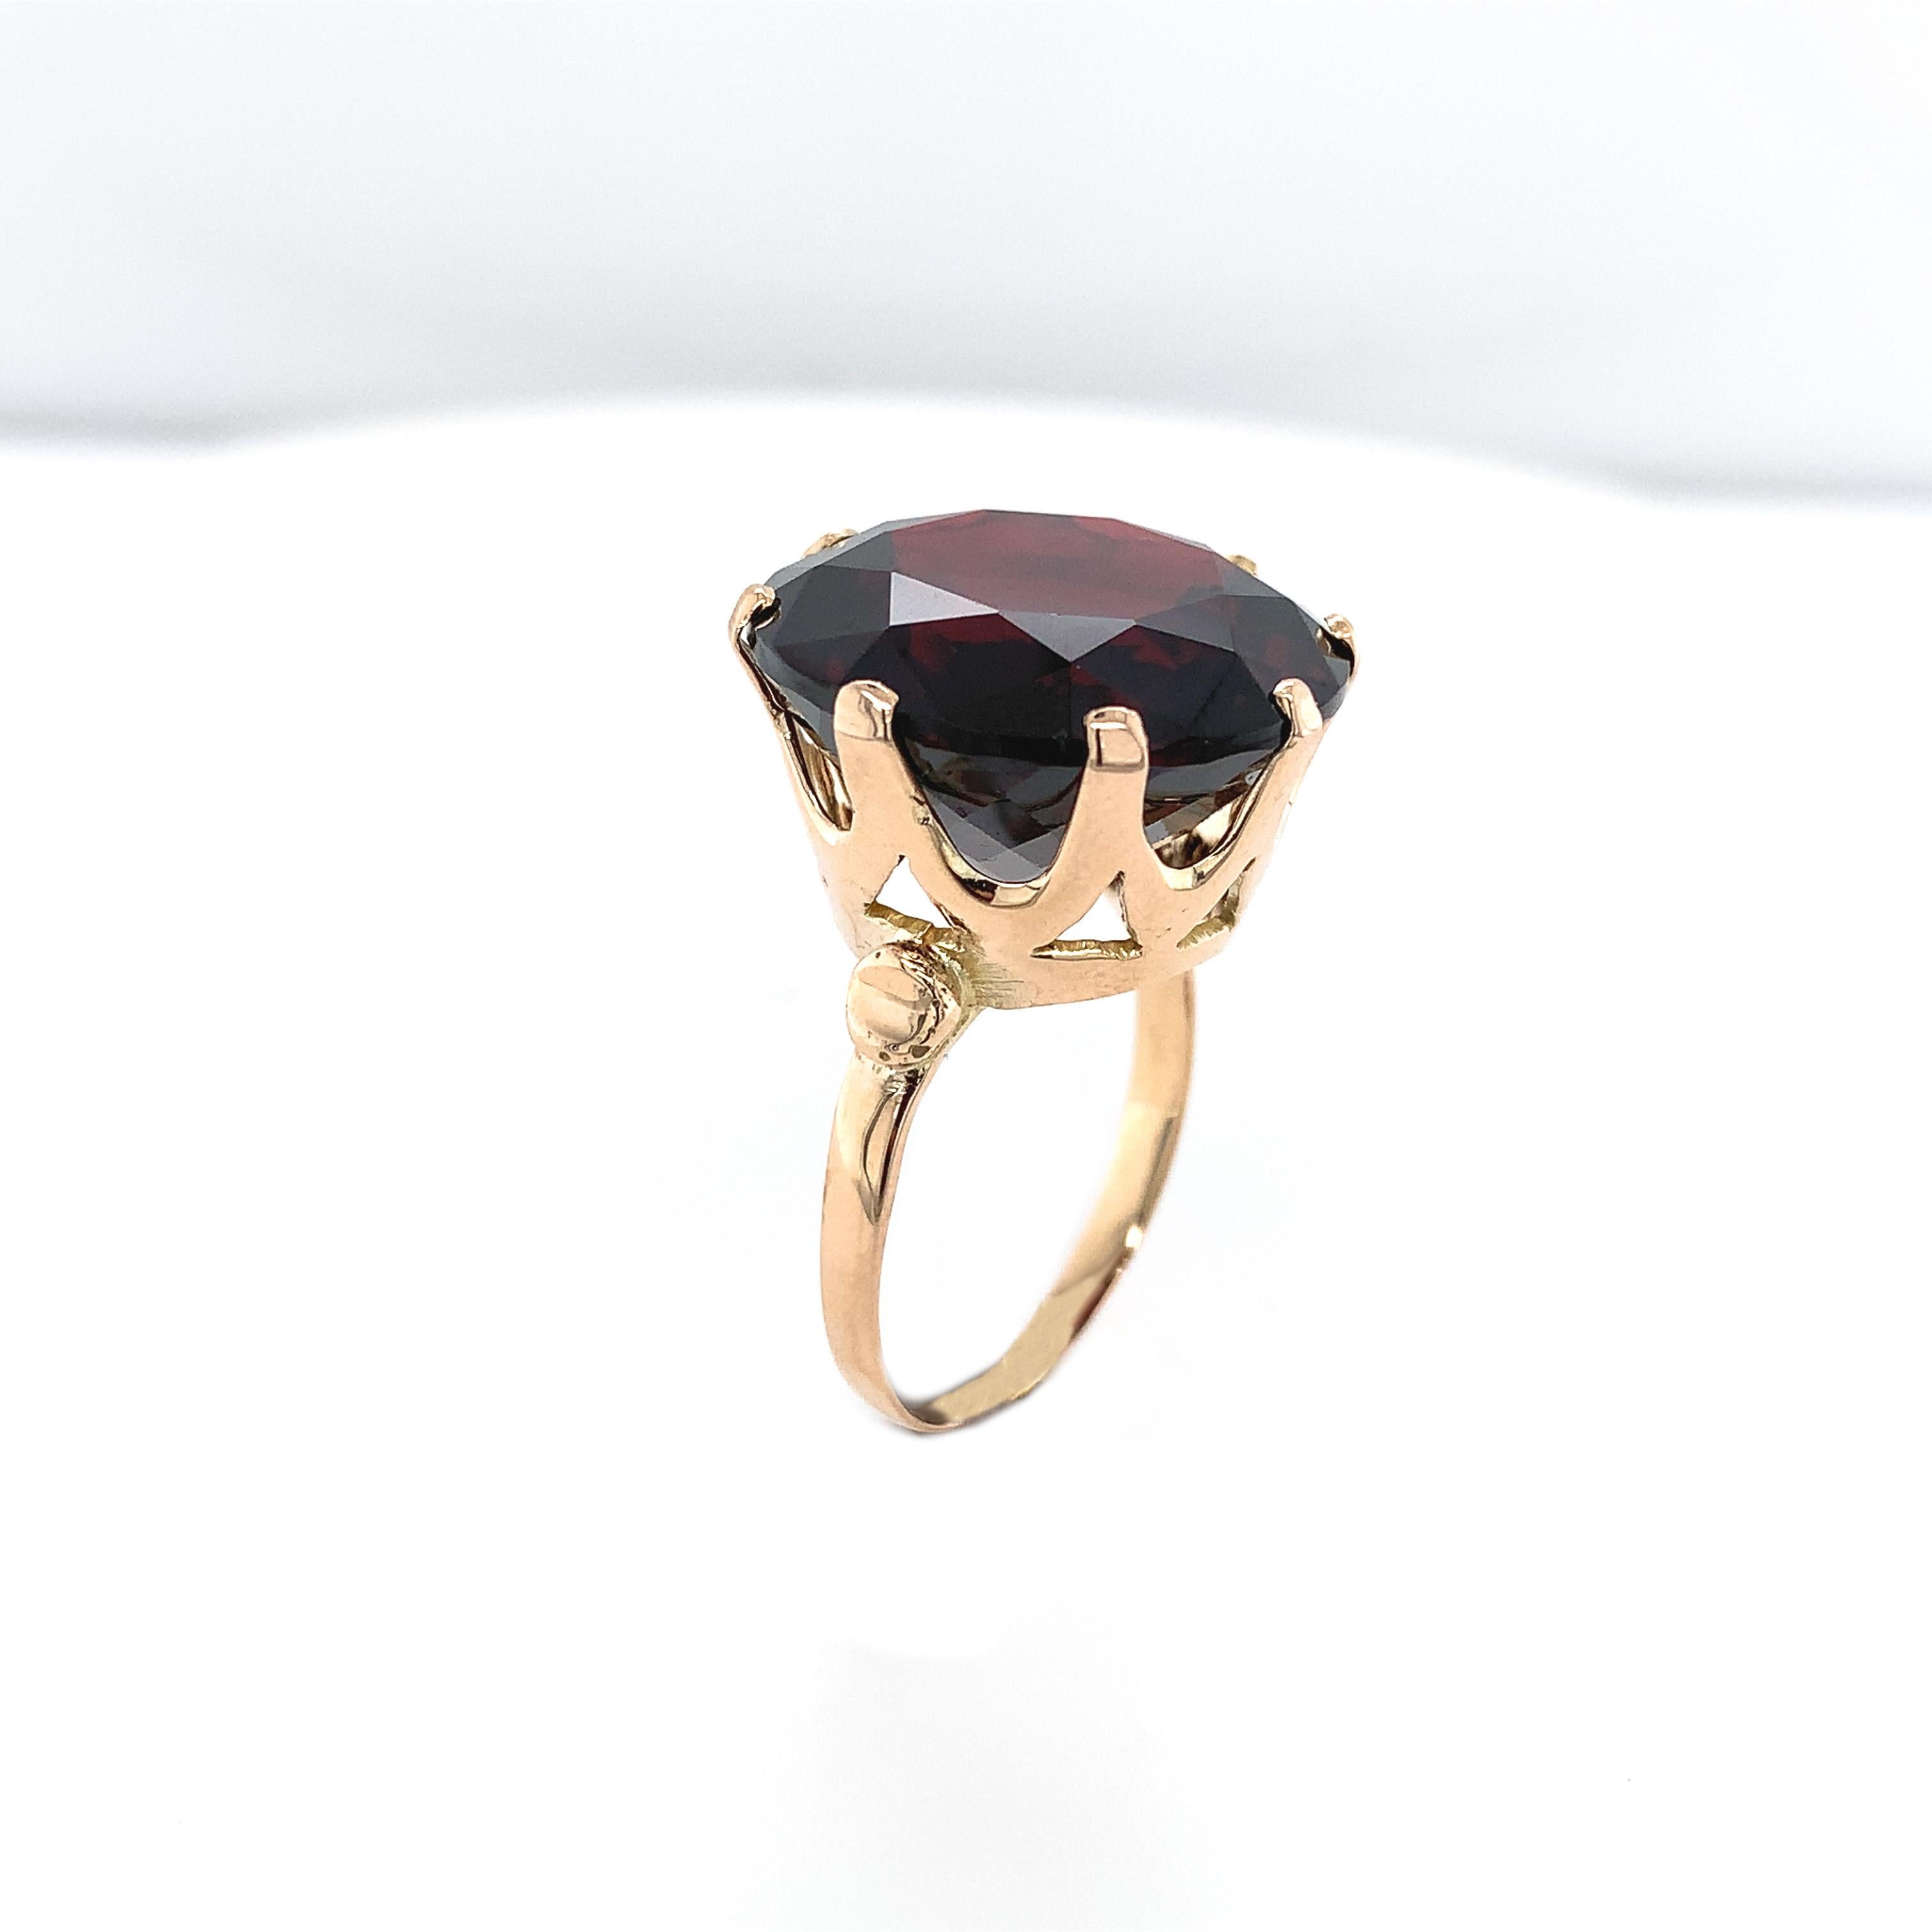 Round Cut 14K Yellow Gold Ring with a Huge 27 carat Round Garnet For Sale